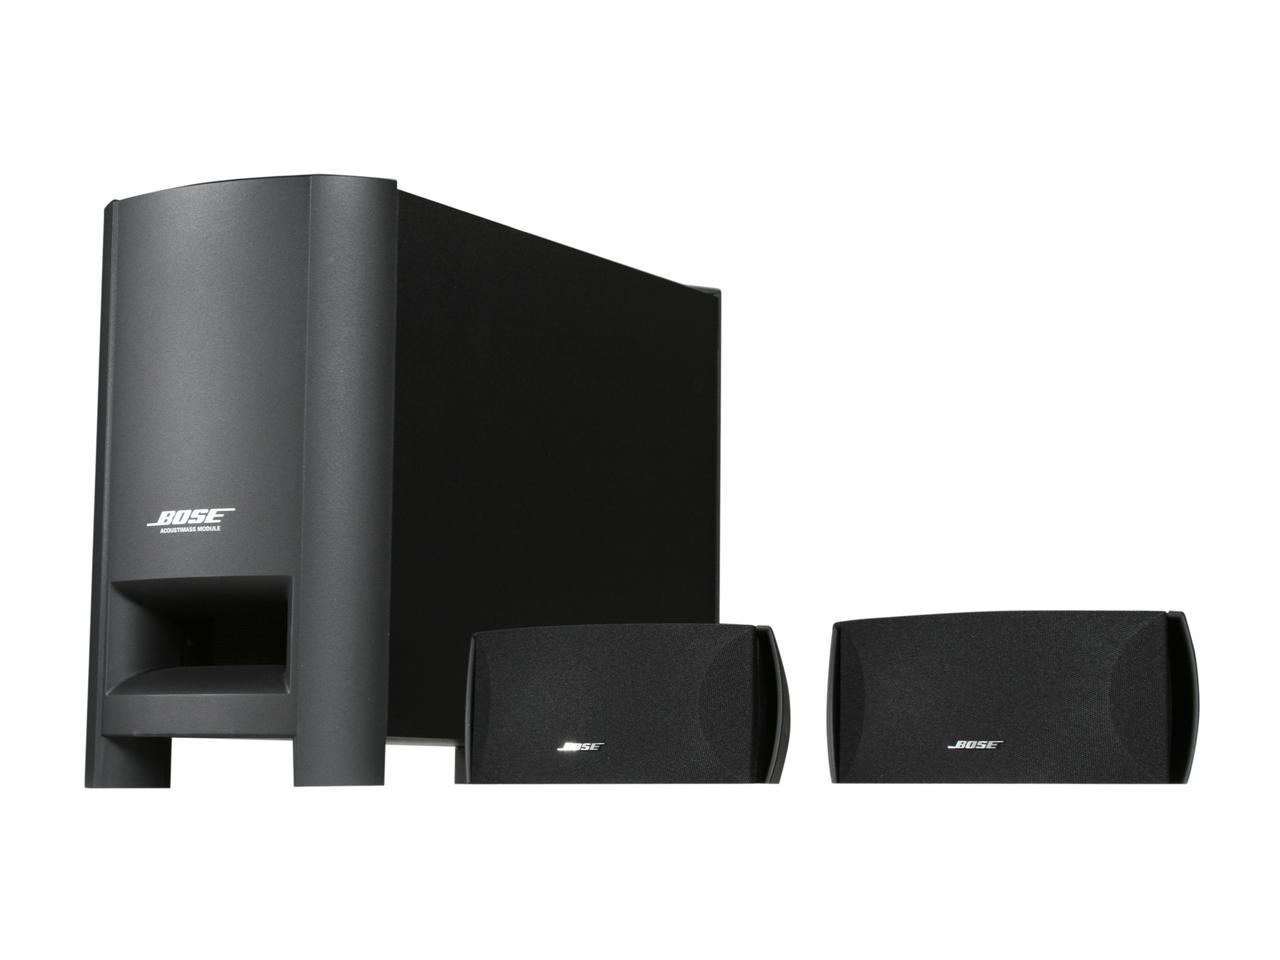 Bose CineMate Digital 2.1 Channel Home Theater Speaker System New Open Box 